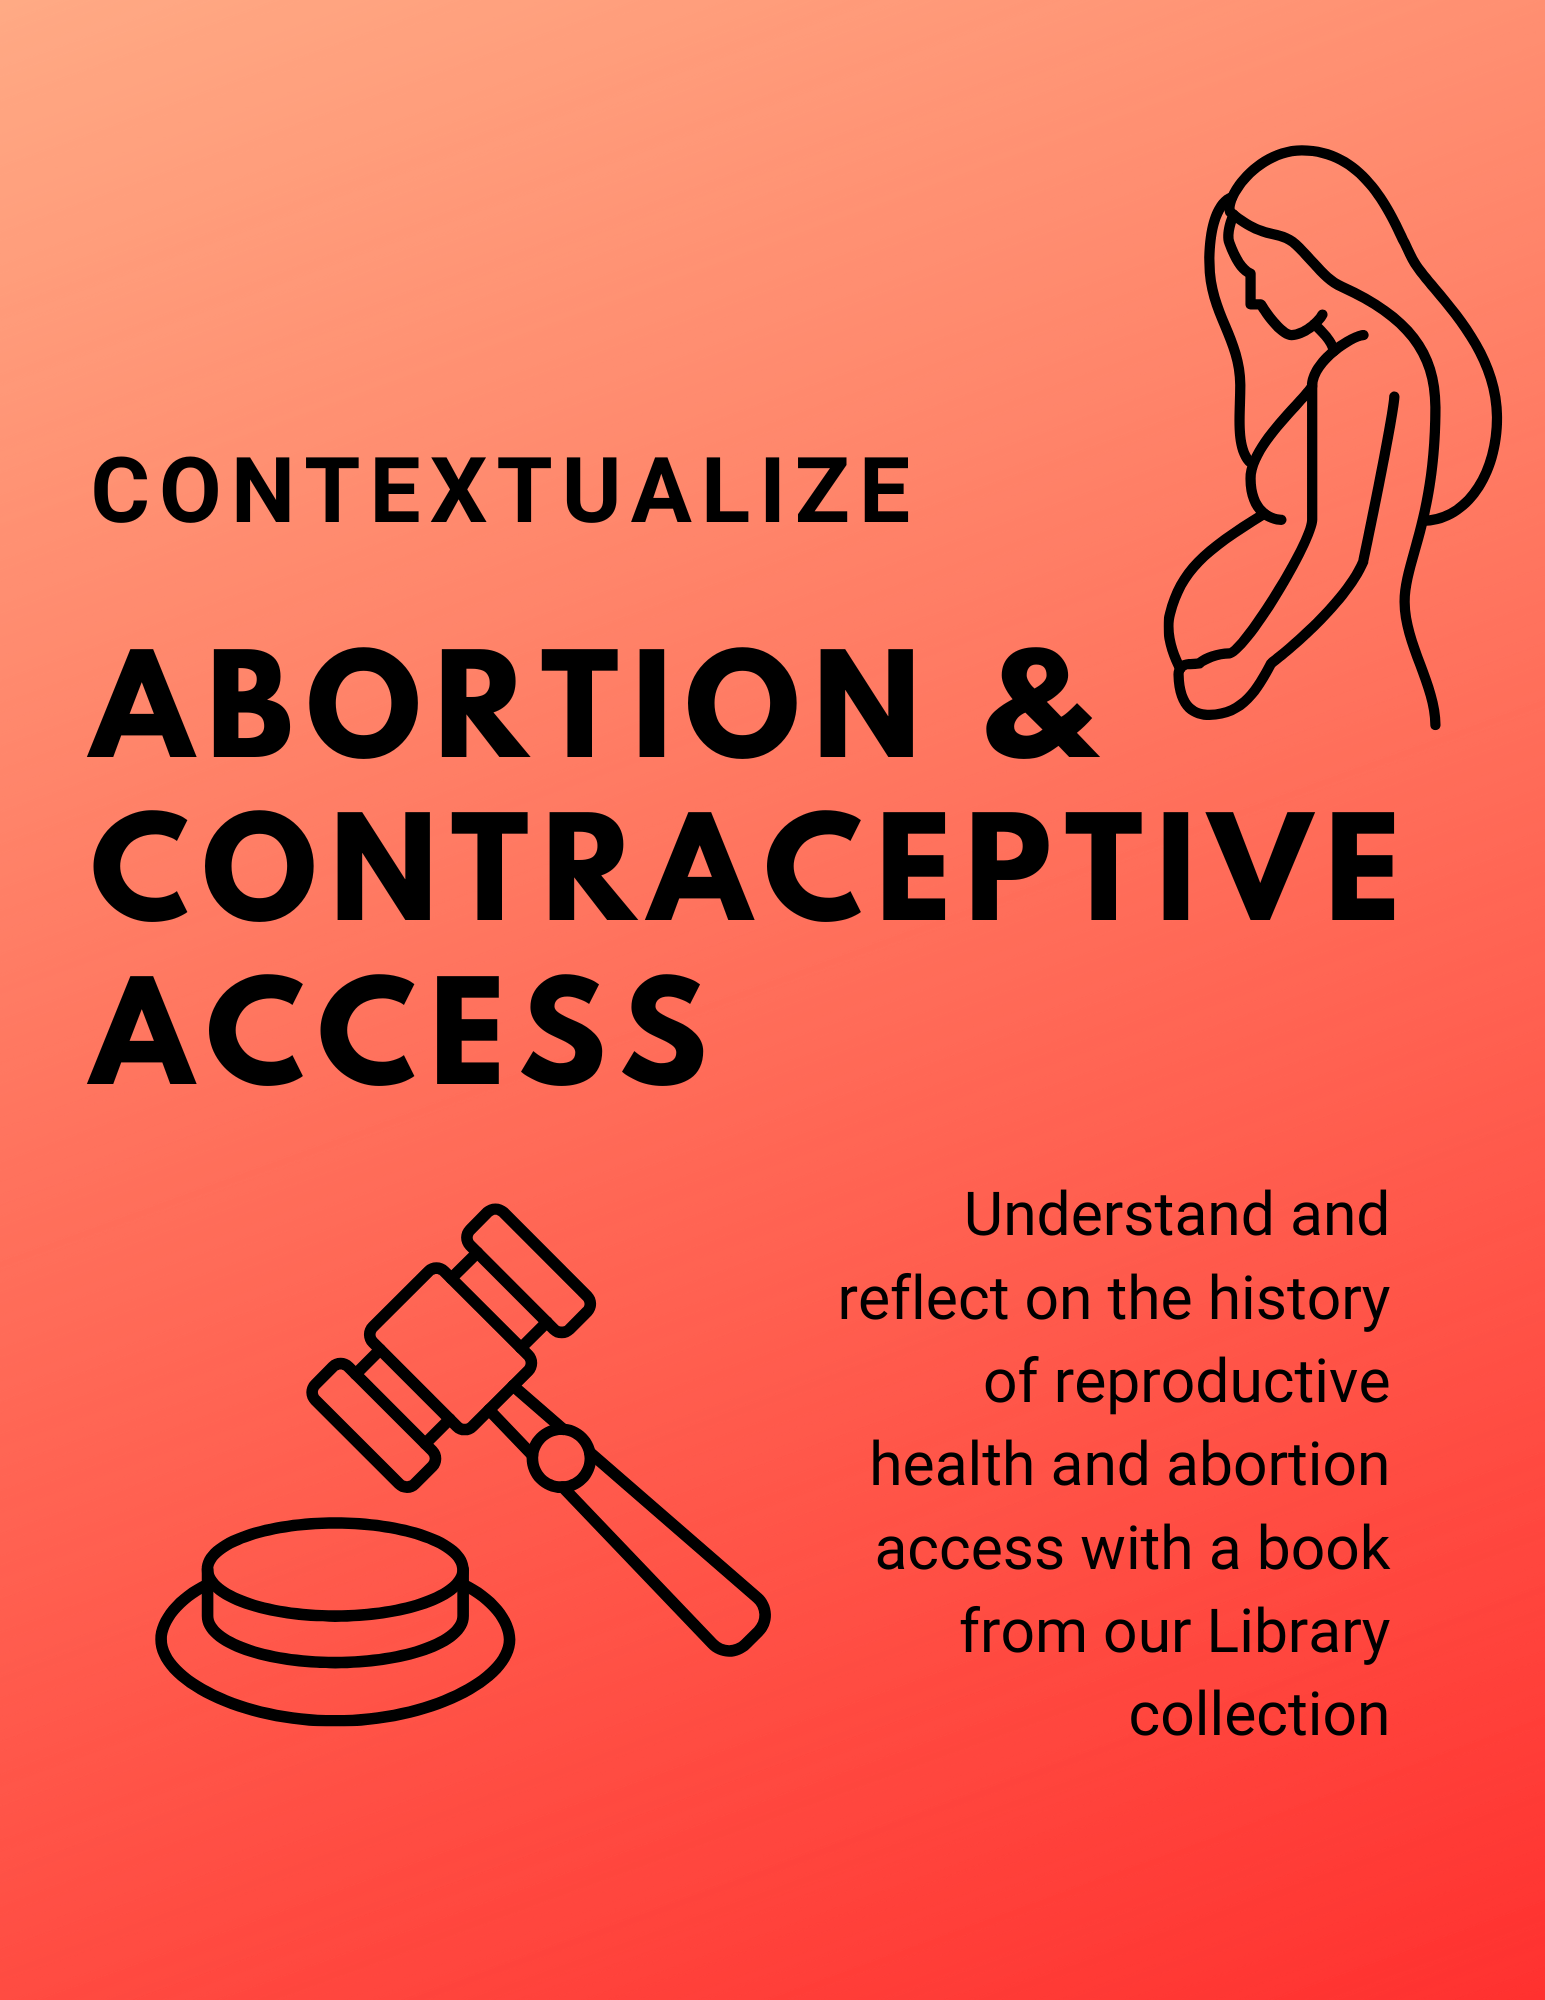 Outlines of a pregnant woman and judicial gavel with text: Contextualize abortion and contraceptive access. Understand and reflect on the history of reproductive health and abortion with a book from our Library collection.